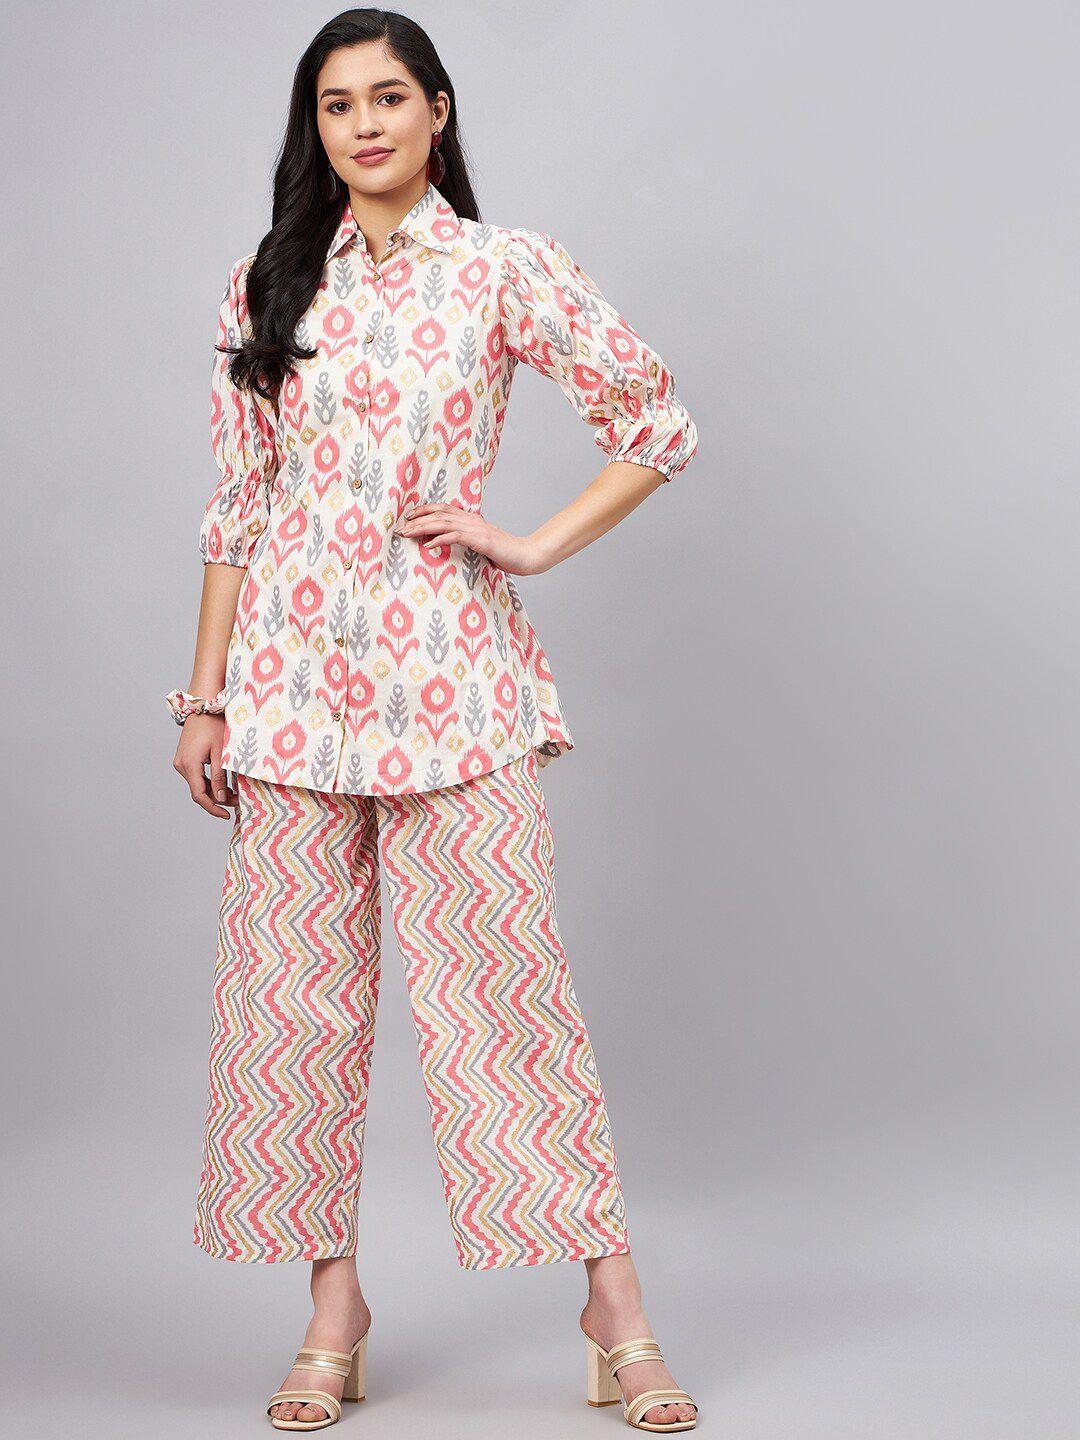 winered floral printed pure cotton shirt with flared palazzos with scrunchy